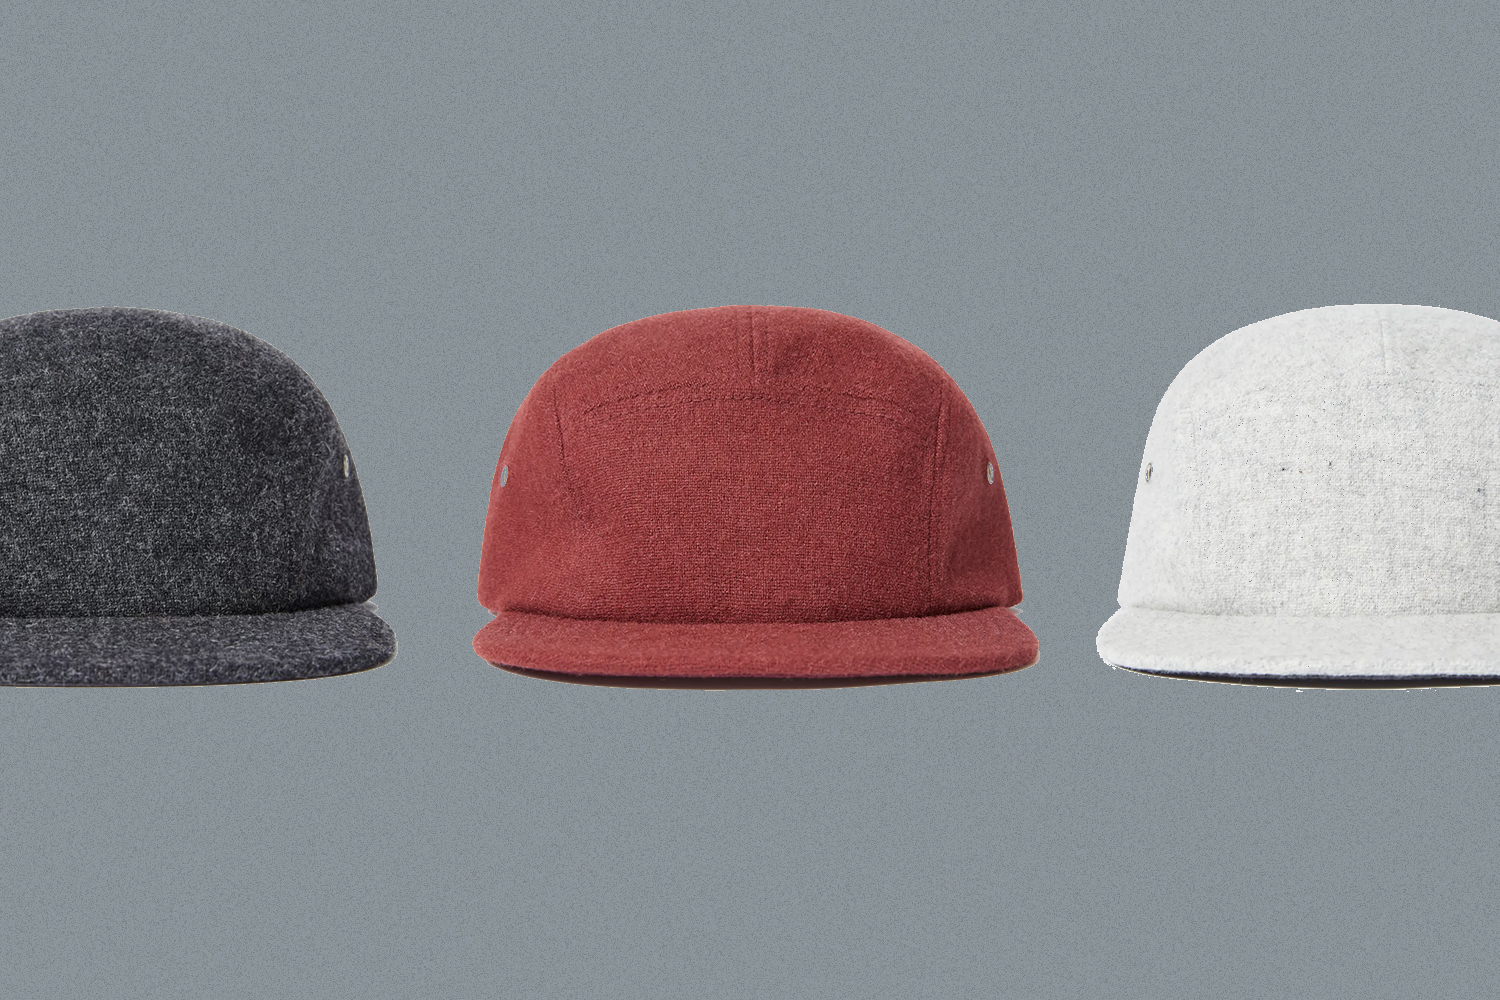 Everlane’s Wool Five-Panel Cap Is the Perfect Cold-Weather Companion